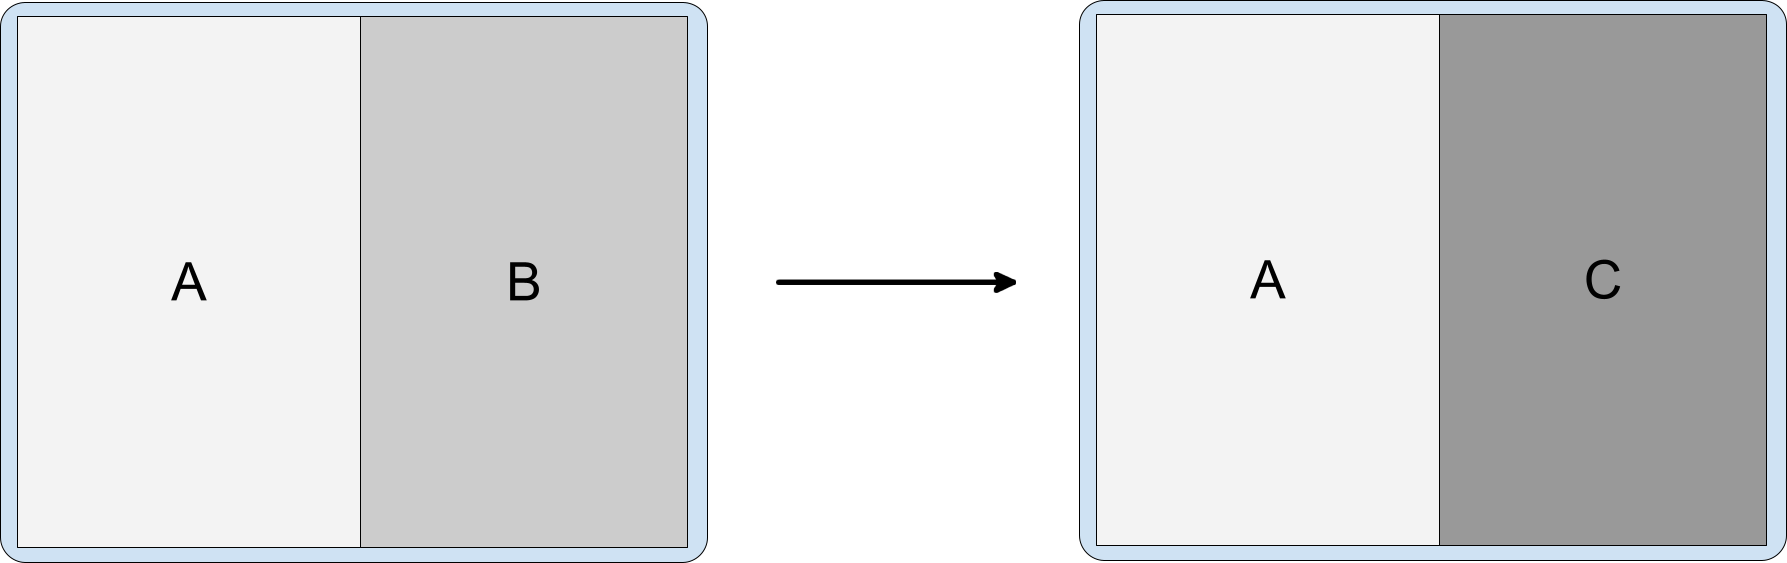 Activity split containing activites A, B, and C with C stacked on
          top of B.